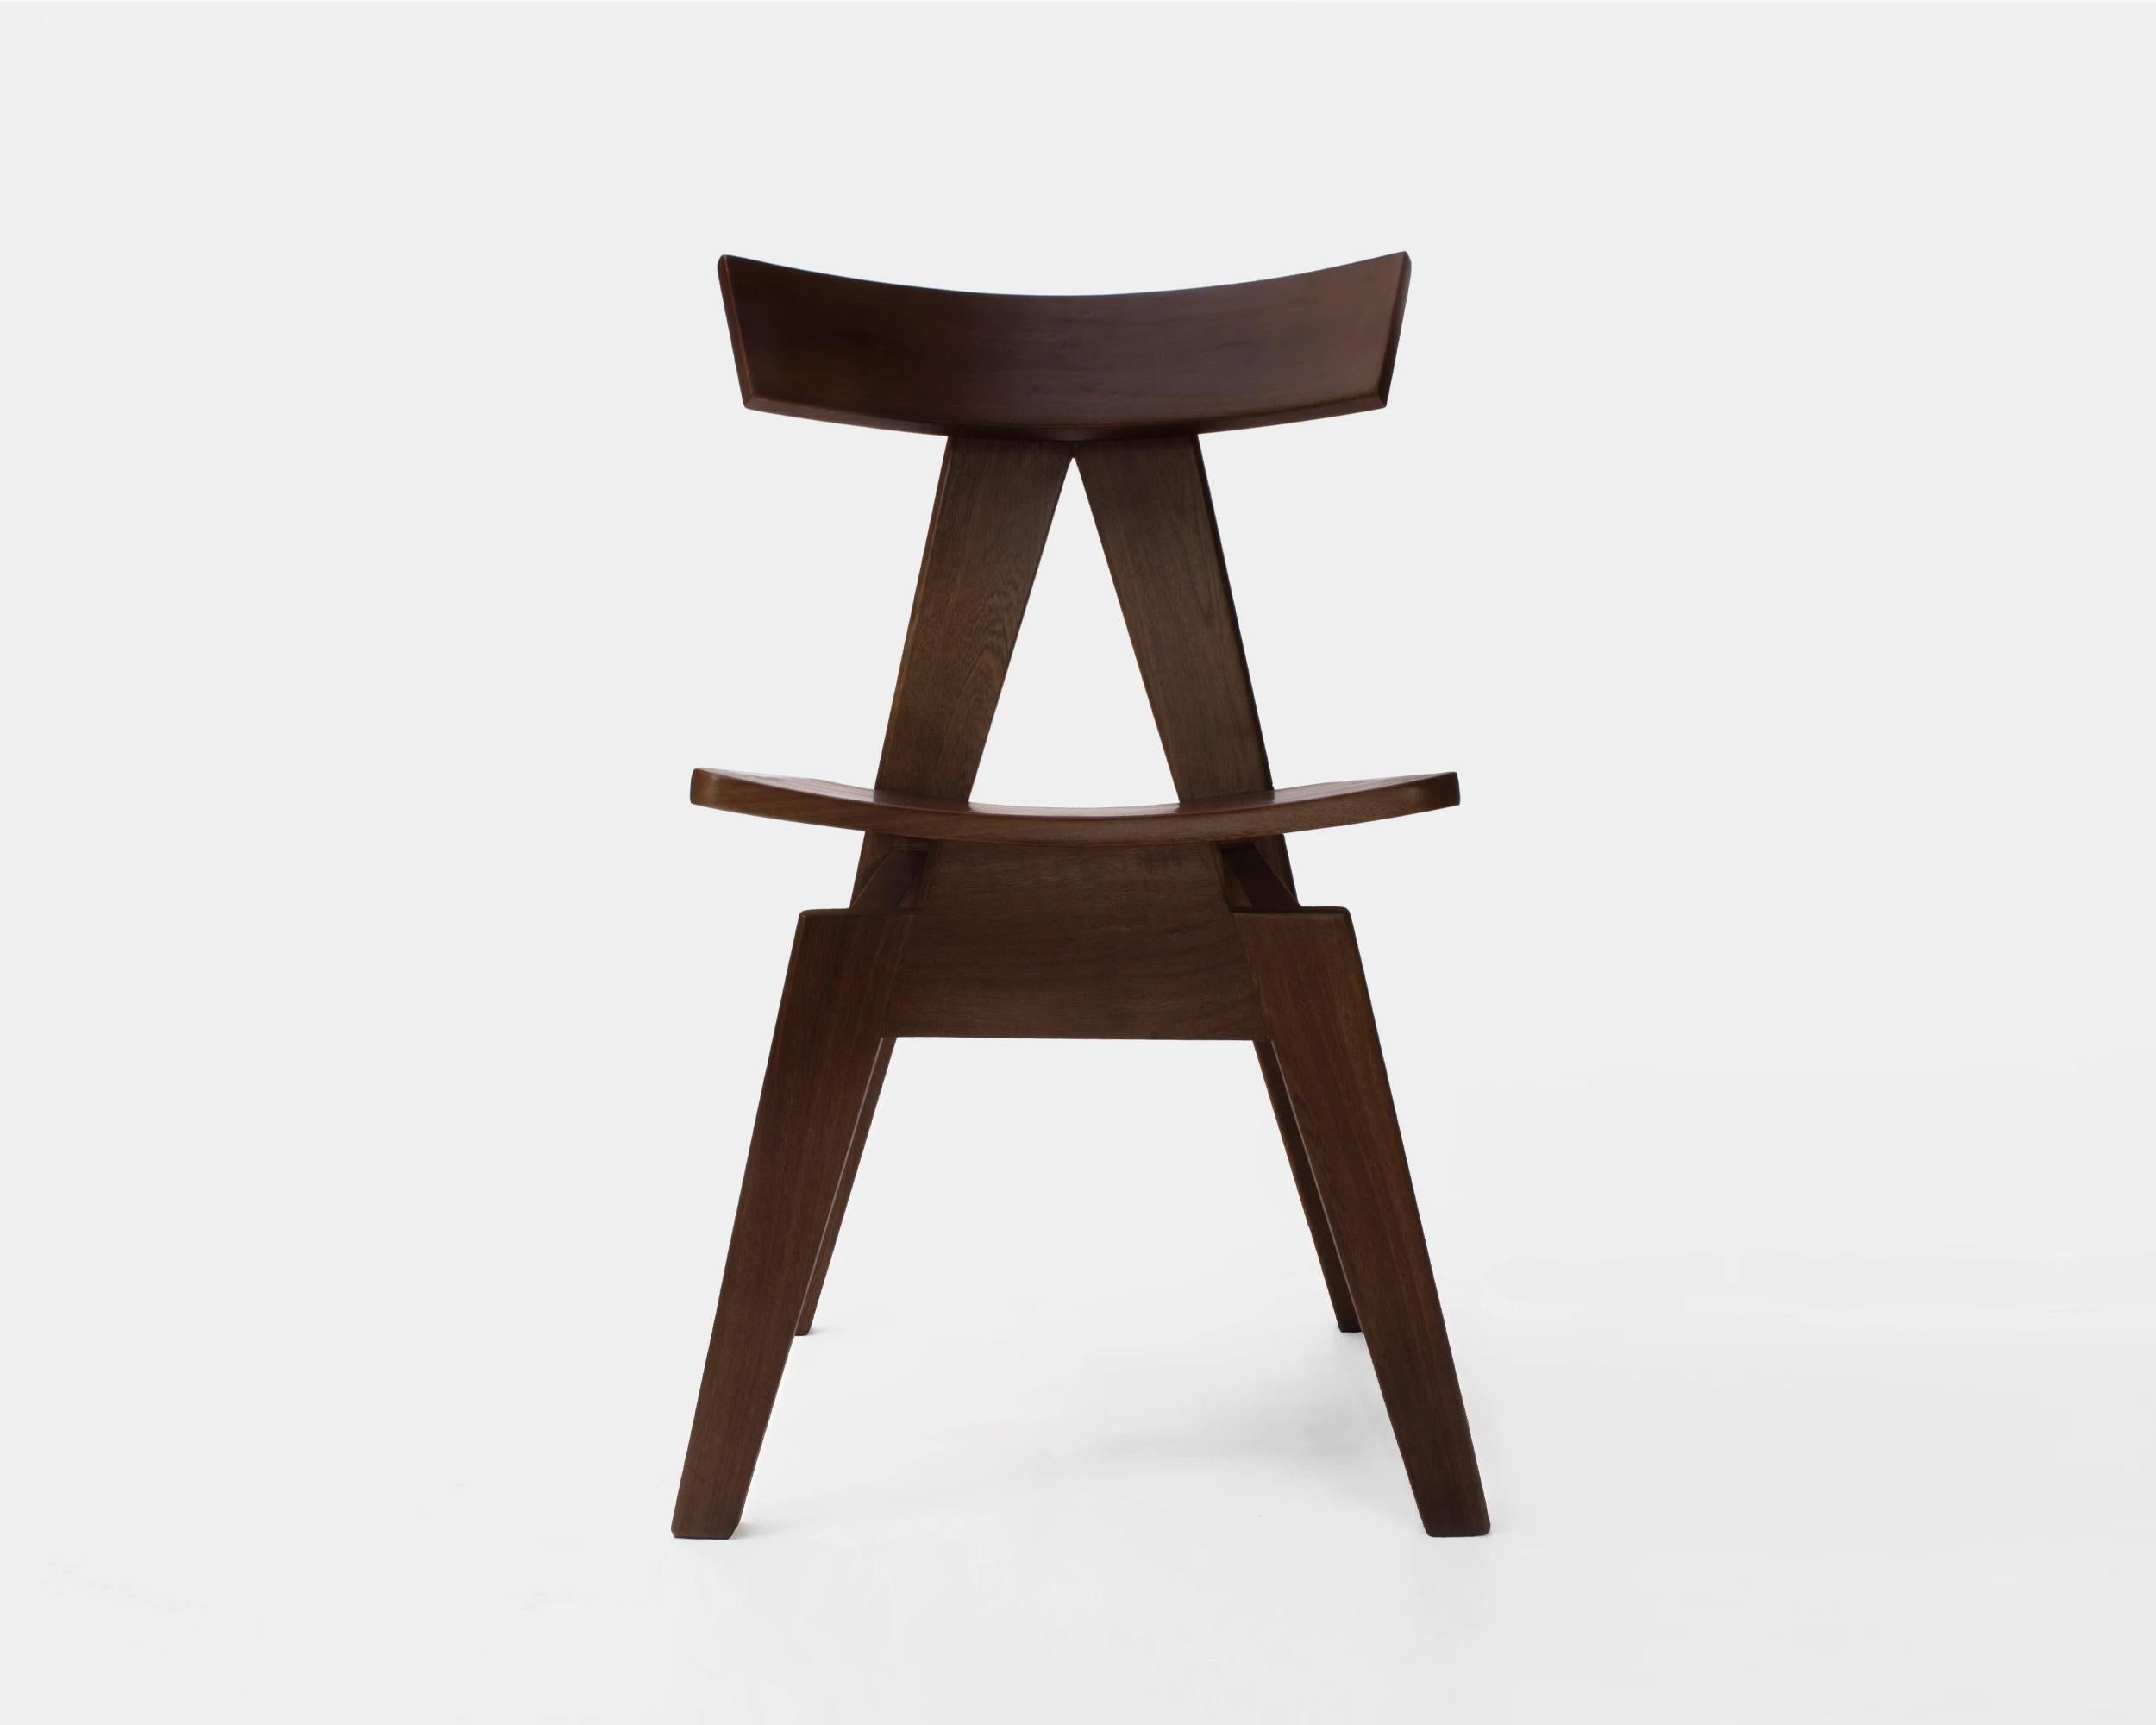 Dining chair Marquez by Camilo Andres Rodriguez Marquez (aka CarmWorks)

Solid oak or cedar / Burnt wood or natural

Each piece is made to order and hand crafted by the artist.

--
Camilo Andres Rodriguez Marquez is a Colombian born designer with a